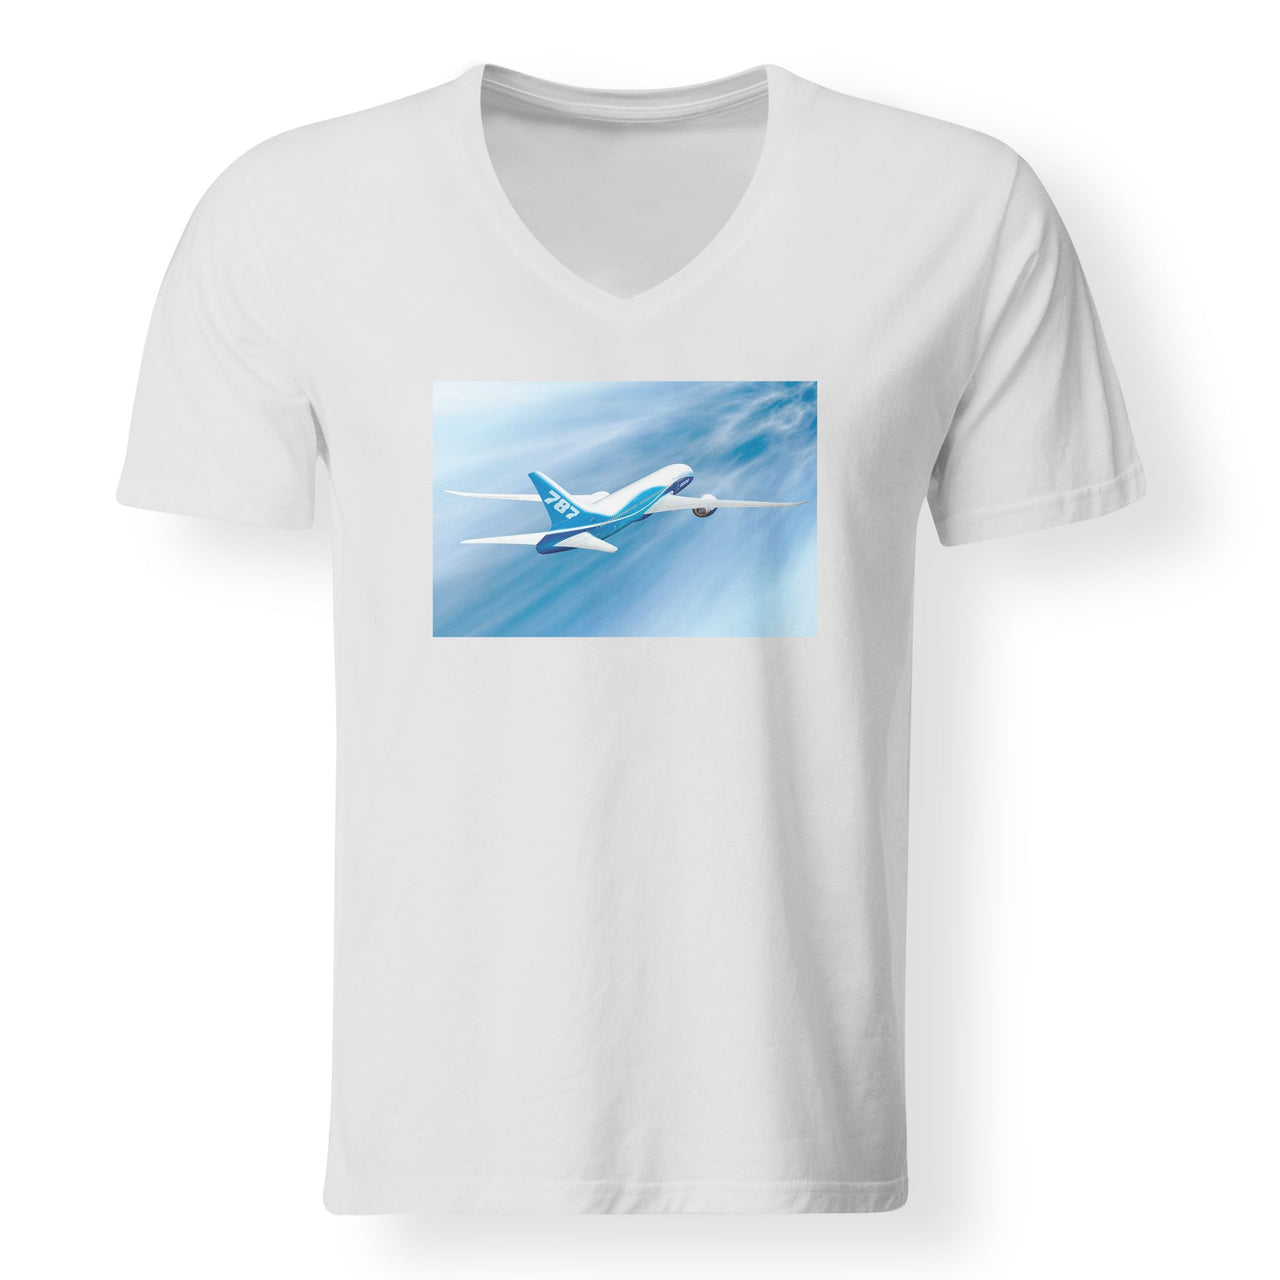 Beautiful Painting of Boeing 787 Dreamliner Designed V-Neck T-Shirts